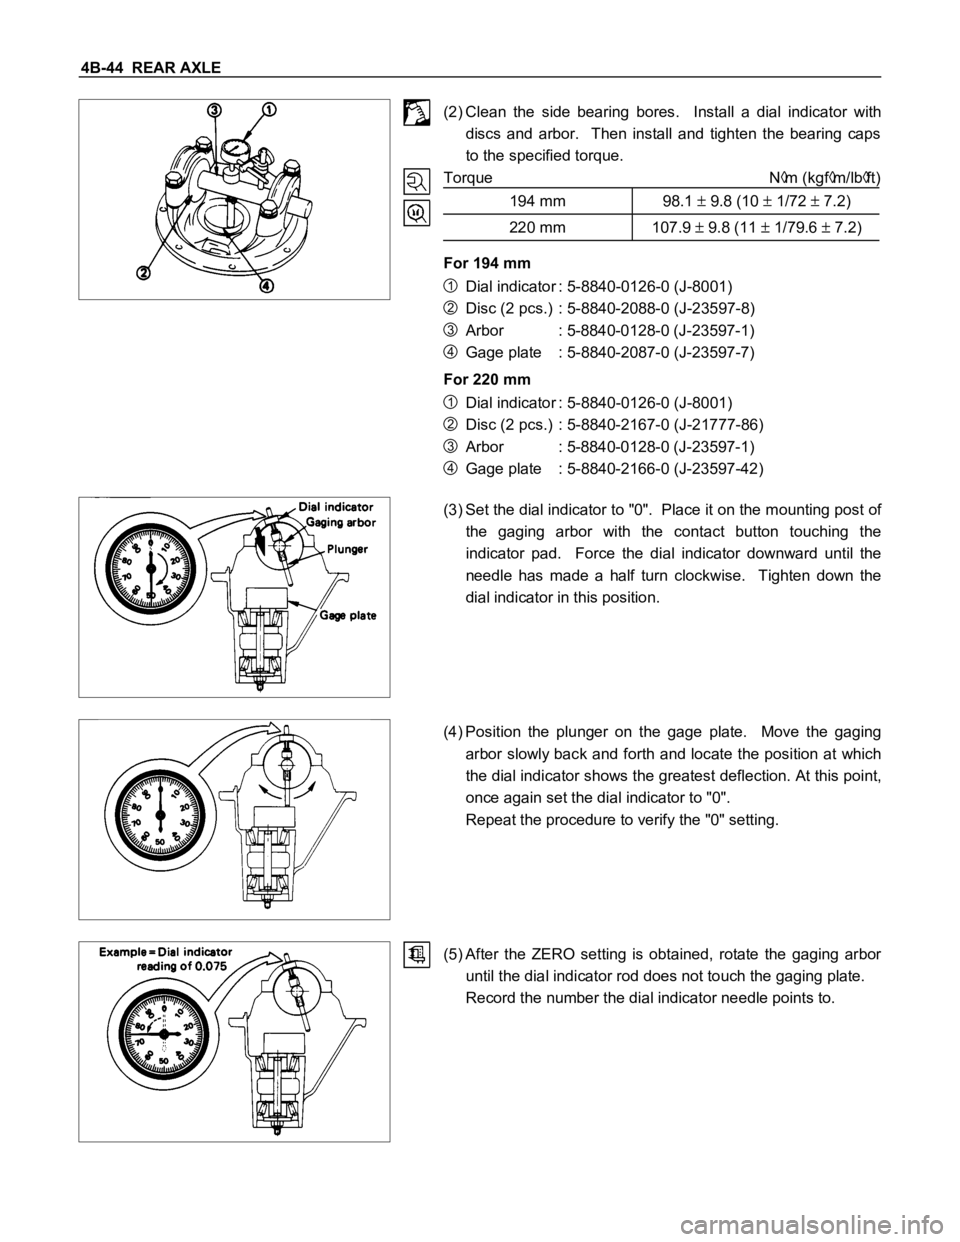 ISUZU TFS SERIES 1997  Workshop Manual 4B-44  REAR AXLE
(2) Clean  the  side  bearing  bores.    Install  a  dial  indicator  with
discs  and  arbor.    Then  install  and  tighten  the  bearing  caps
to the specified torque.
Torque N
m (k